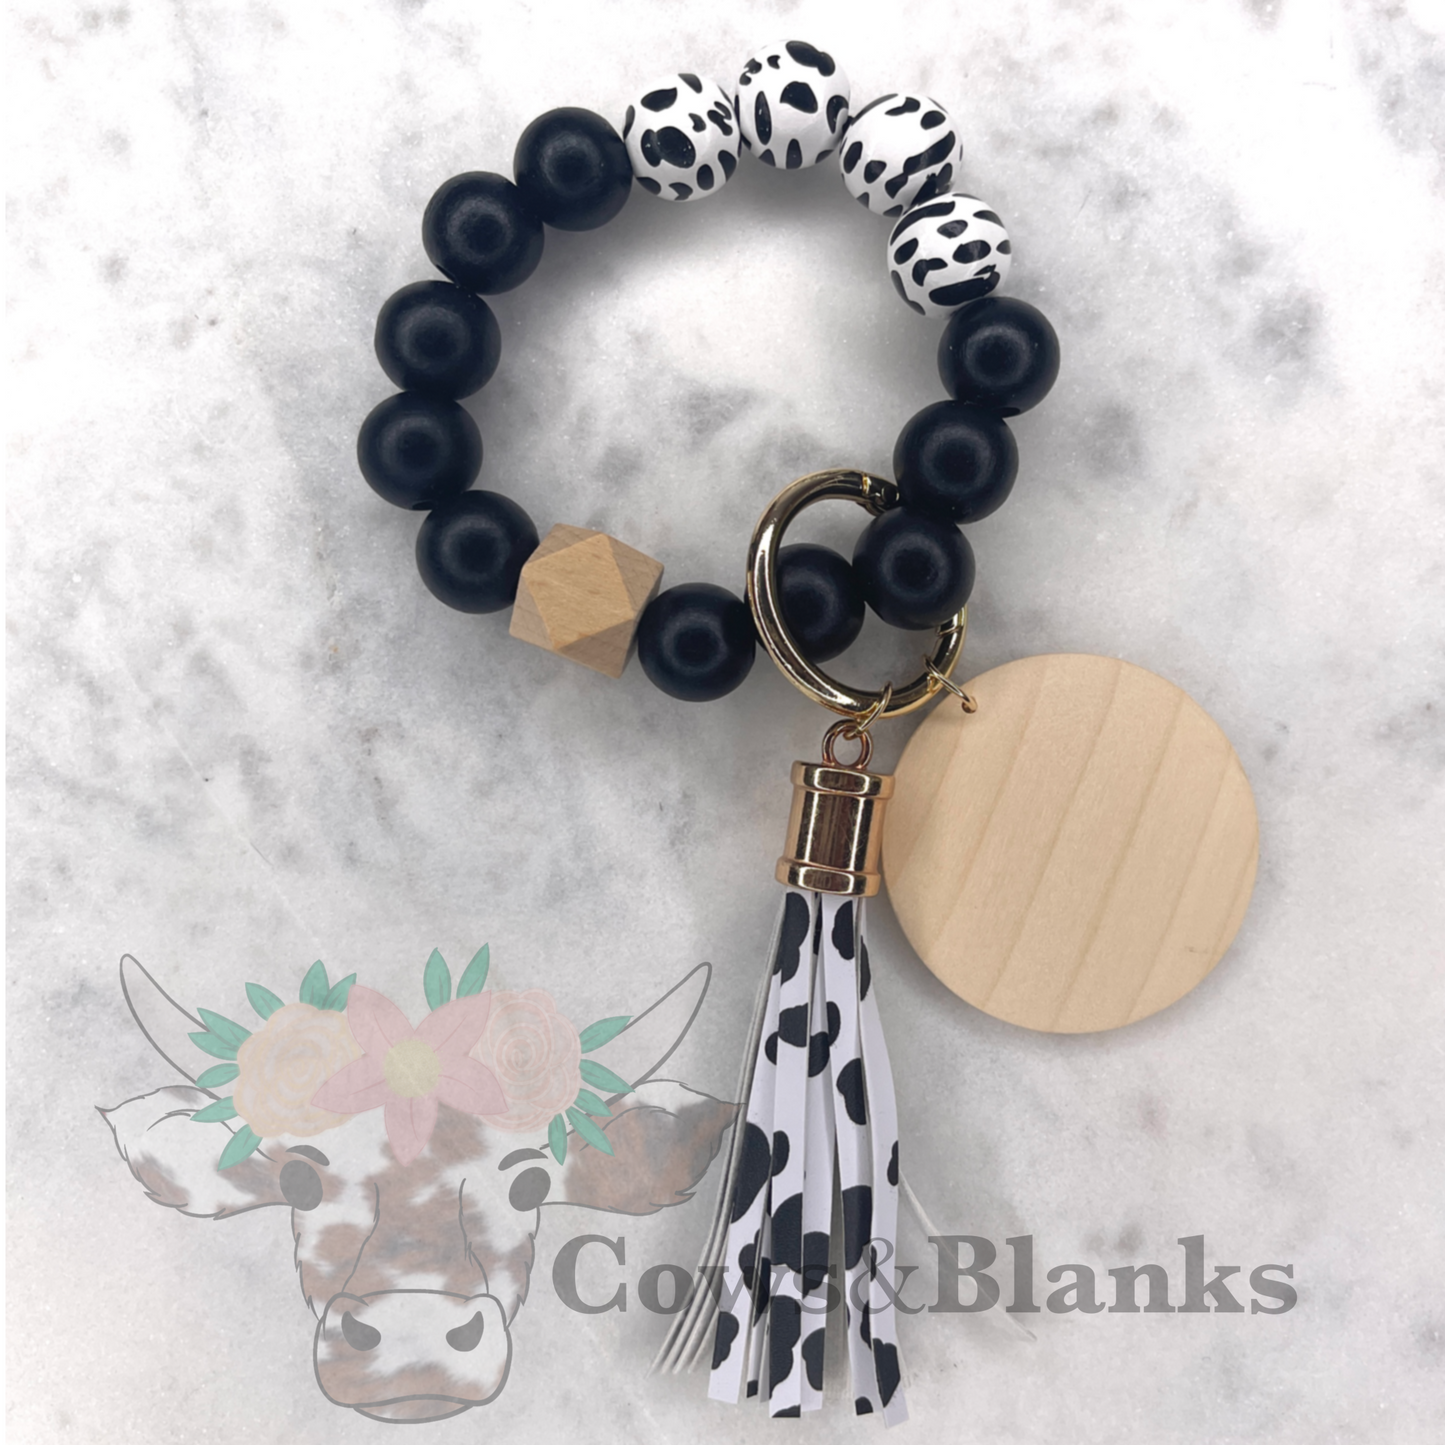 Cow Print Wooden Wristlet Bracelet Keychain with Wooden Disc and Tassel